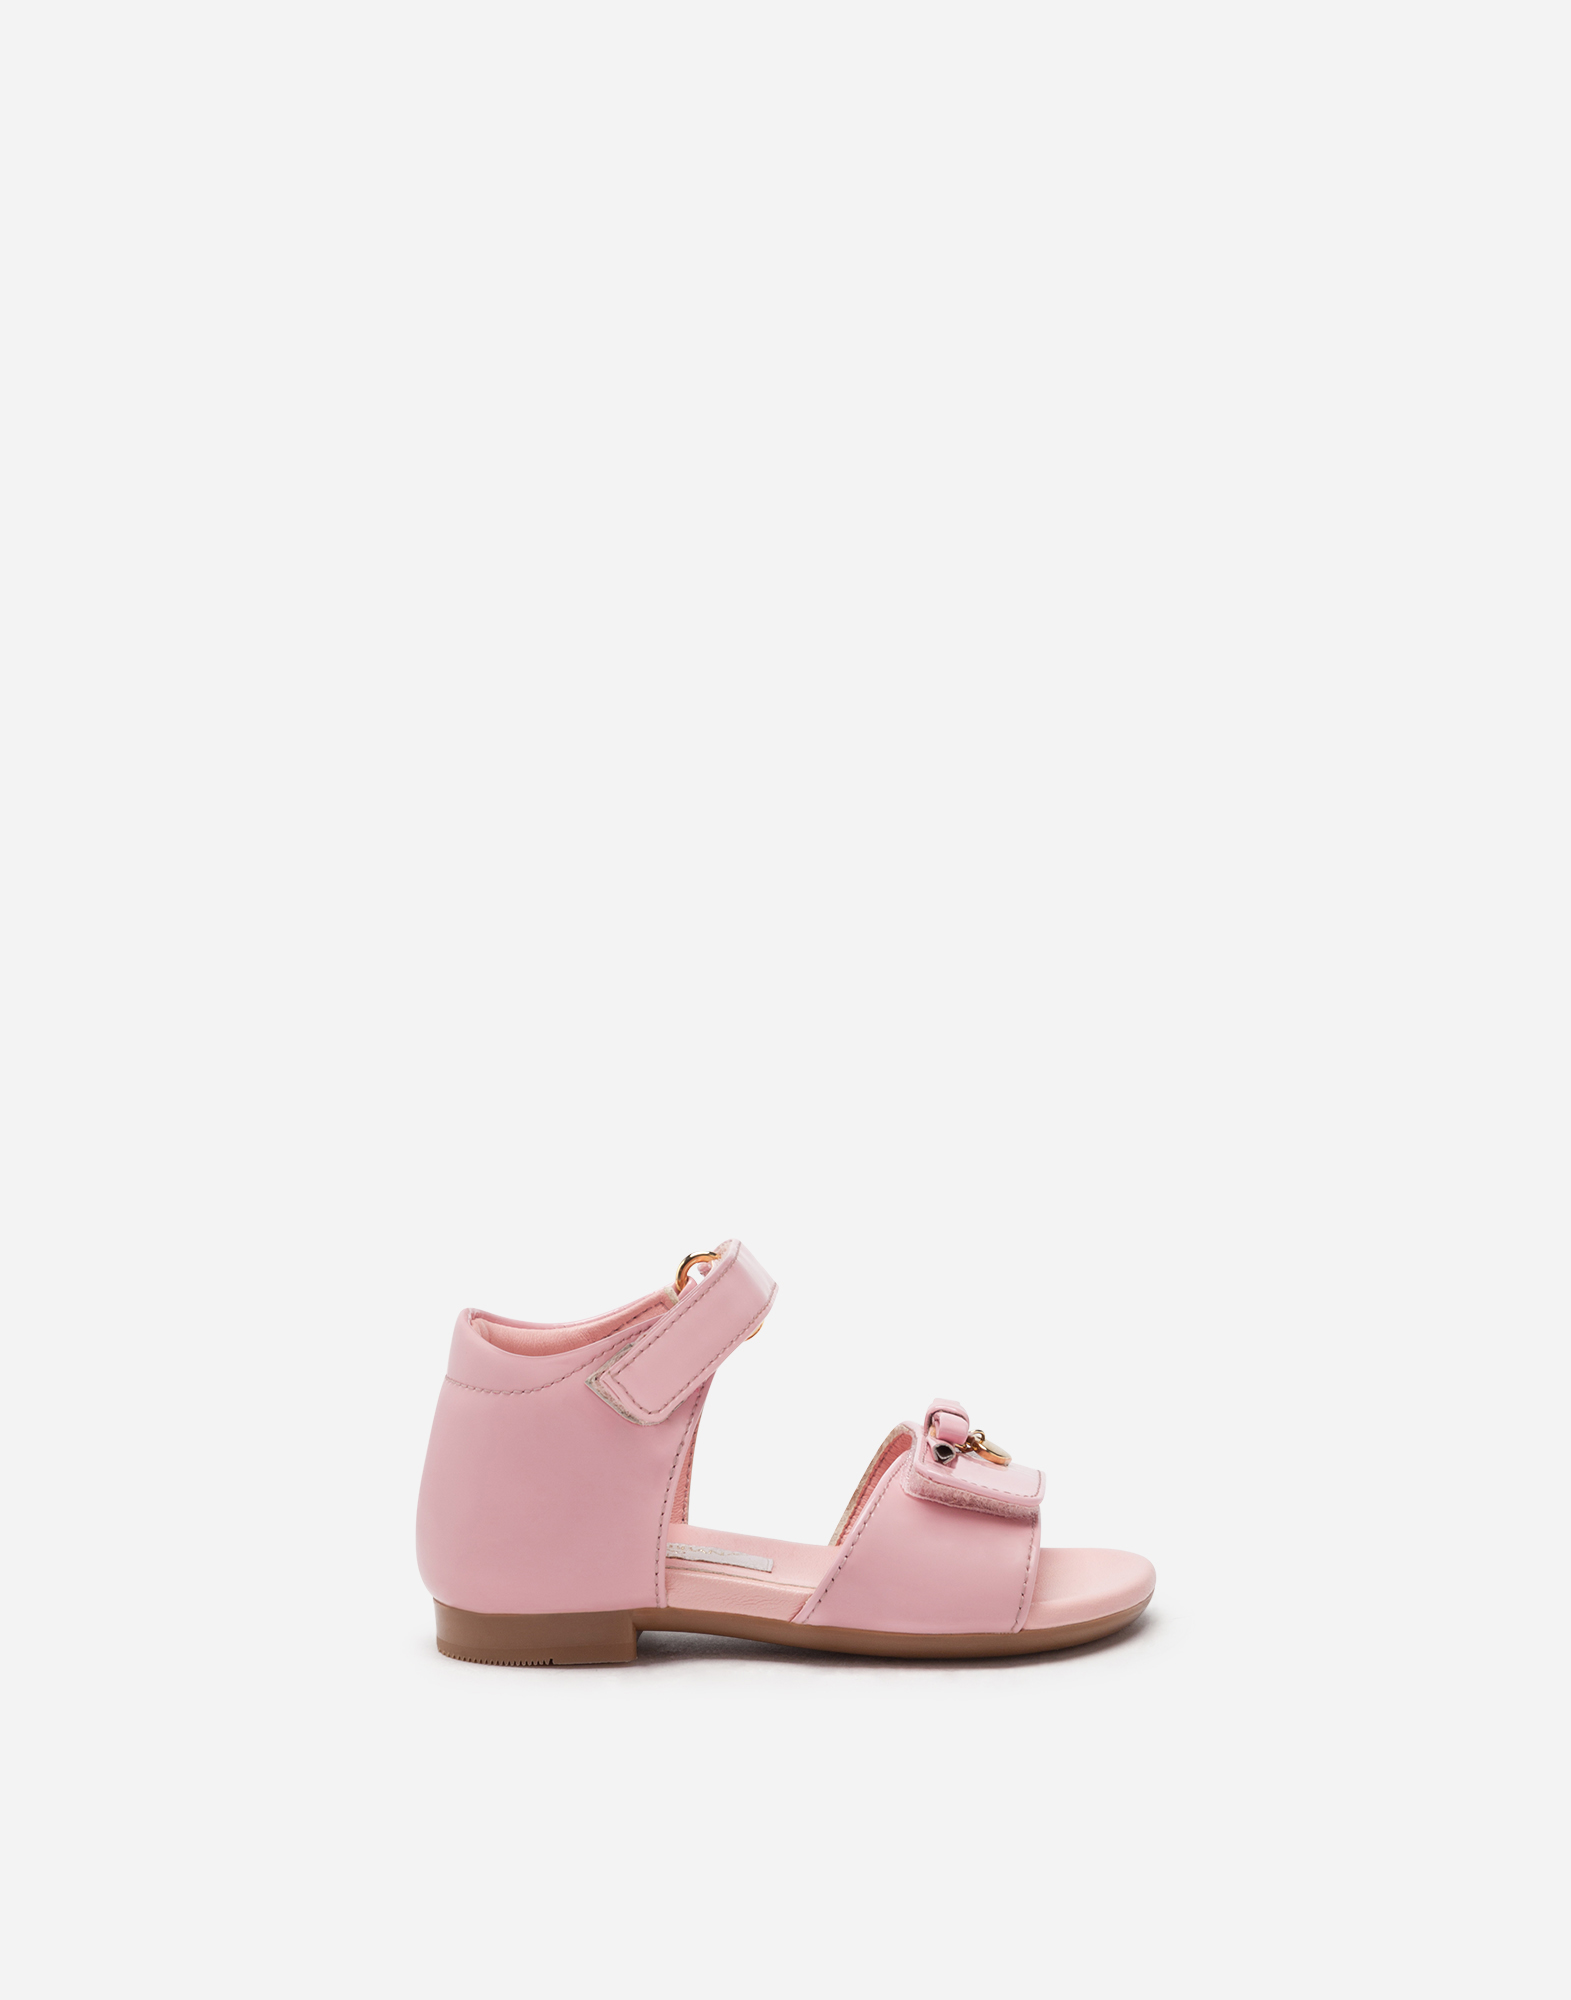 Patent leather sandals with charm embellishment in Pink